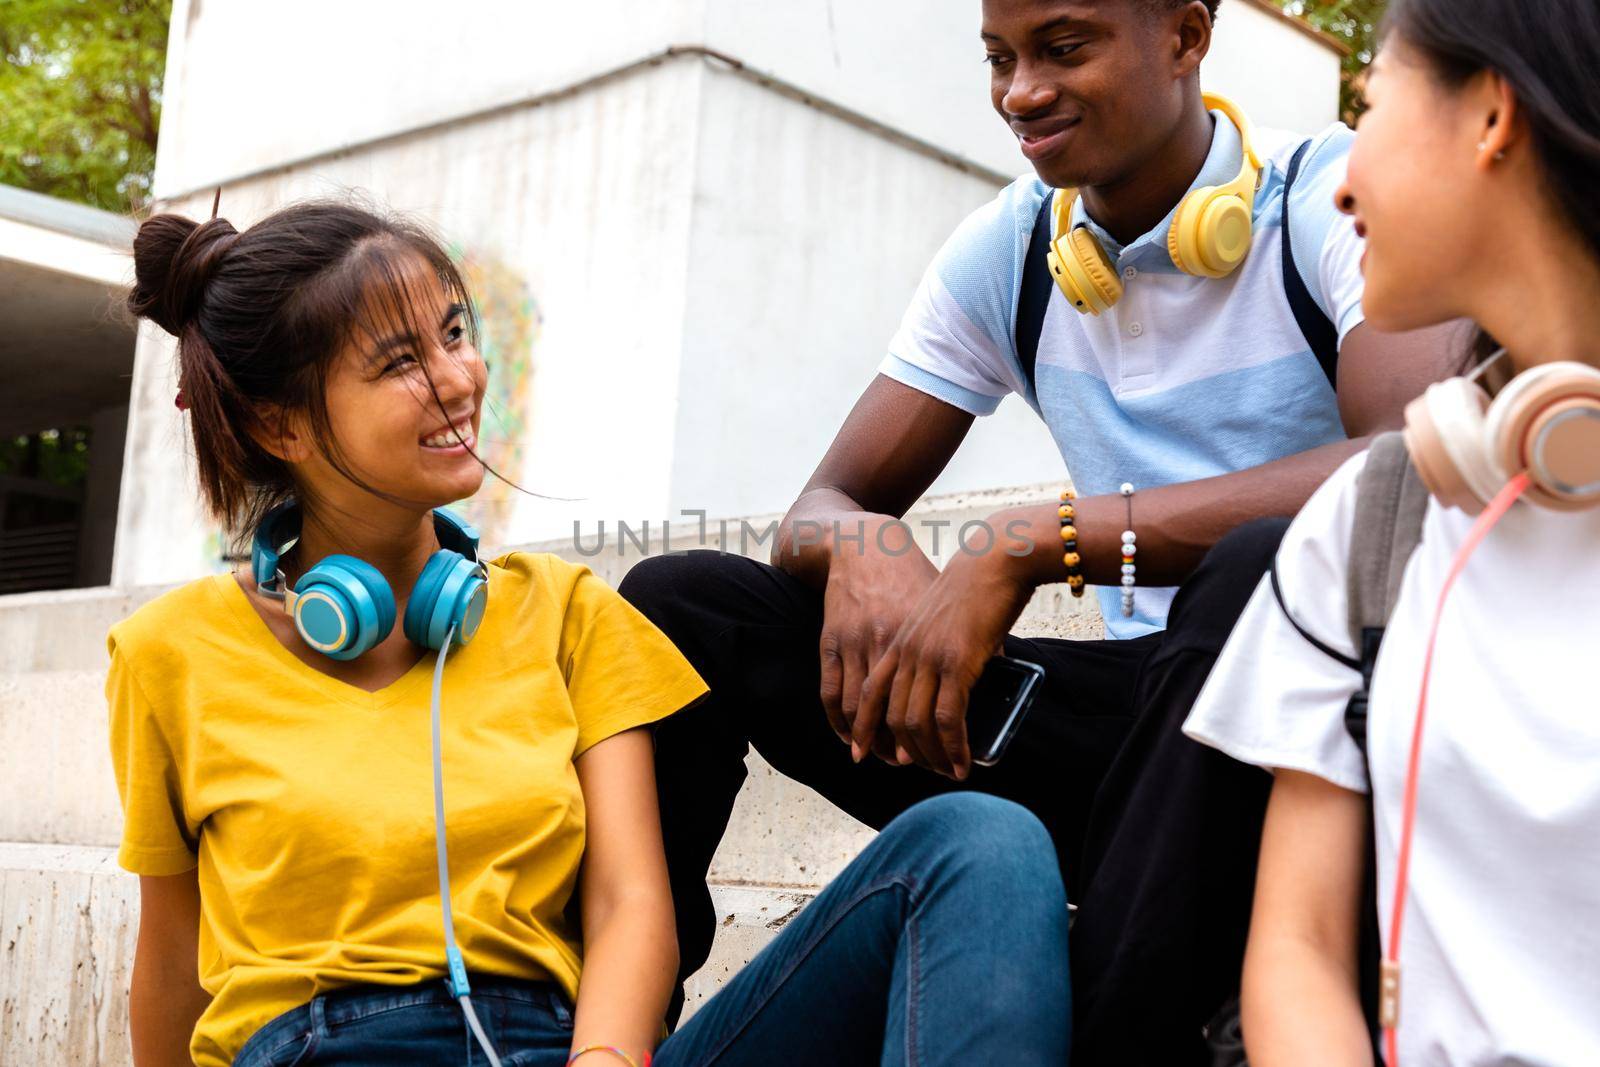 Happy teen multiracial students enjoying time outdoors talking during recess. Lifestyle and education concept.